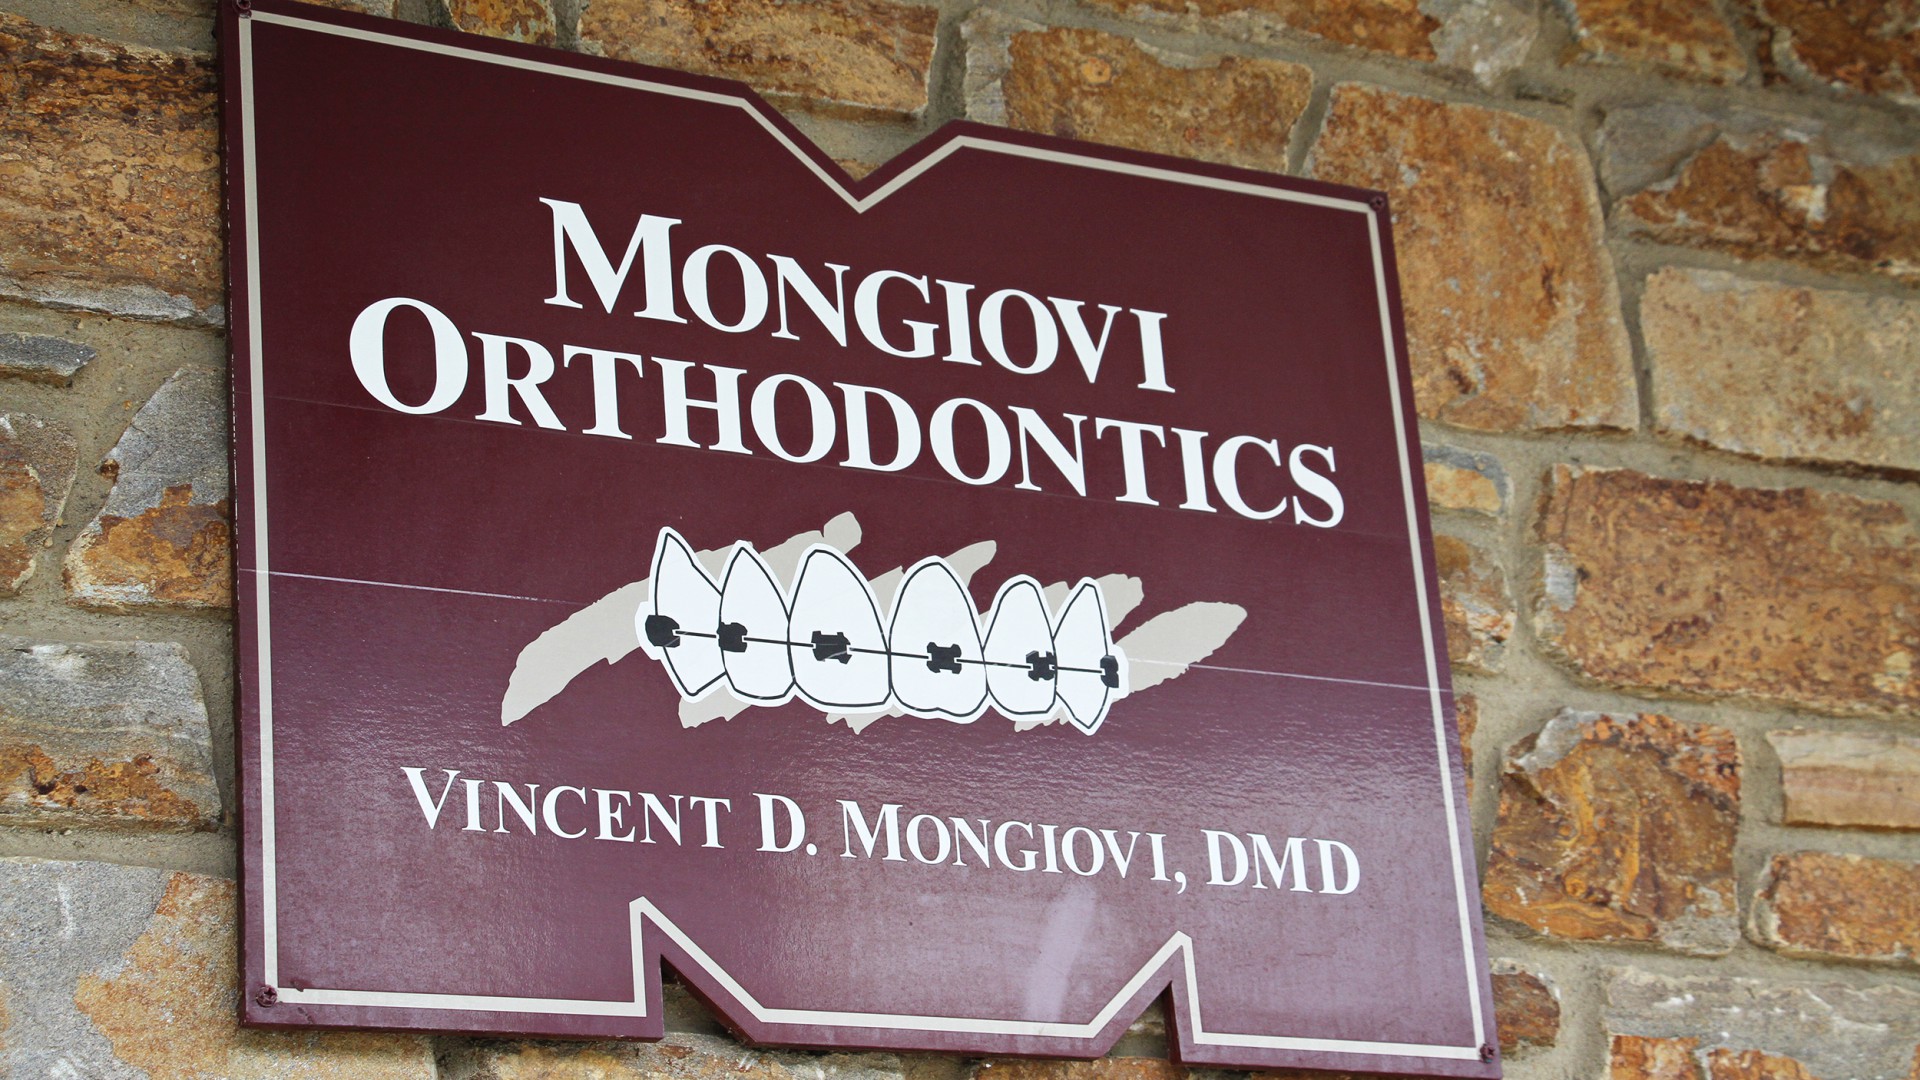 Picture of the Mongiovi Orthodontics sign on the front of the building